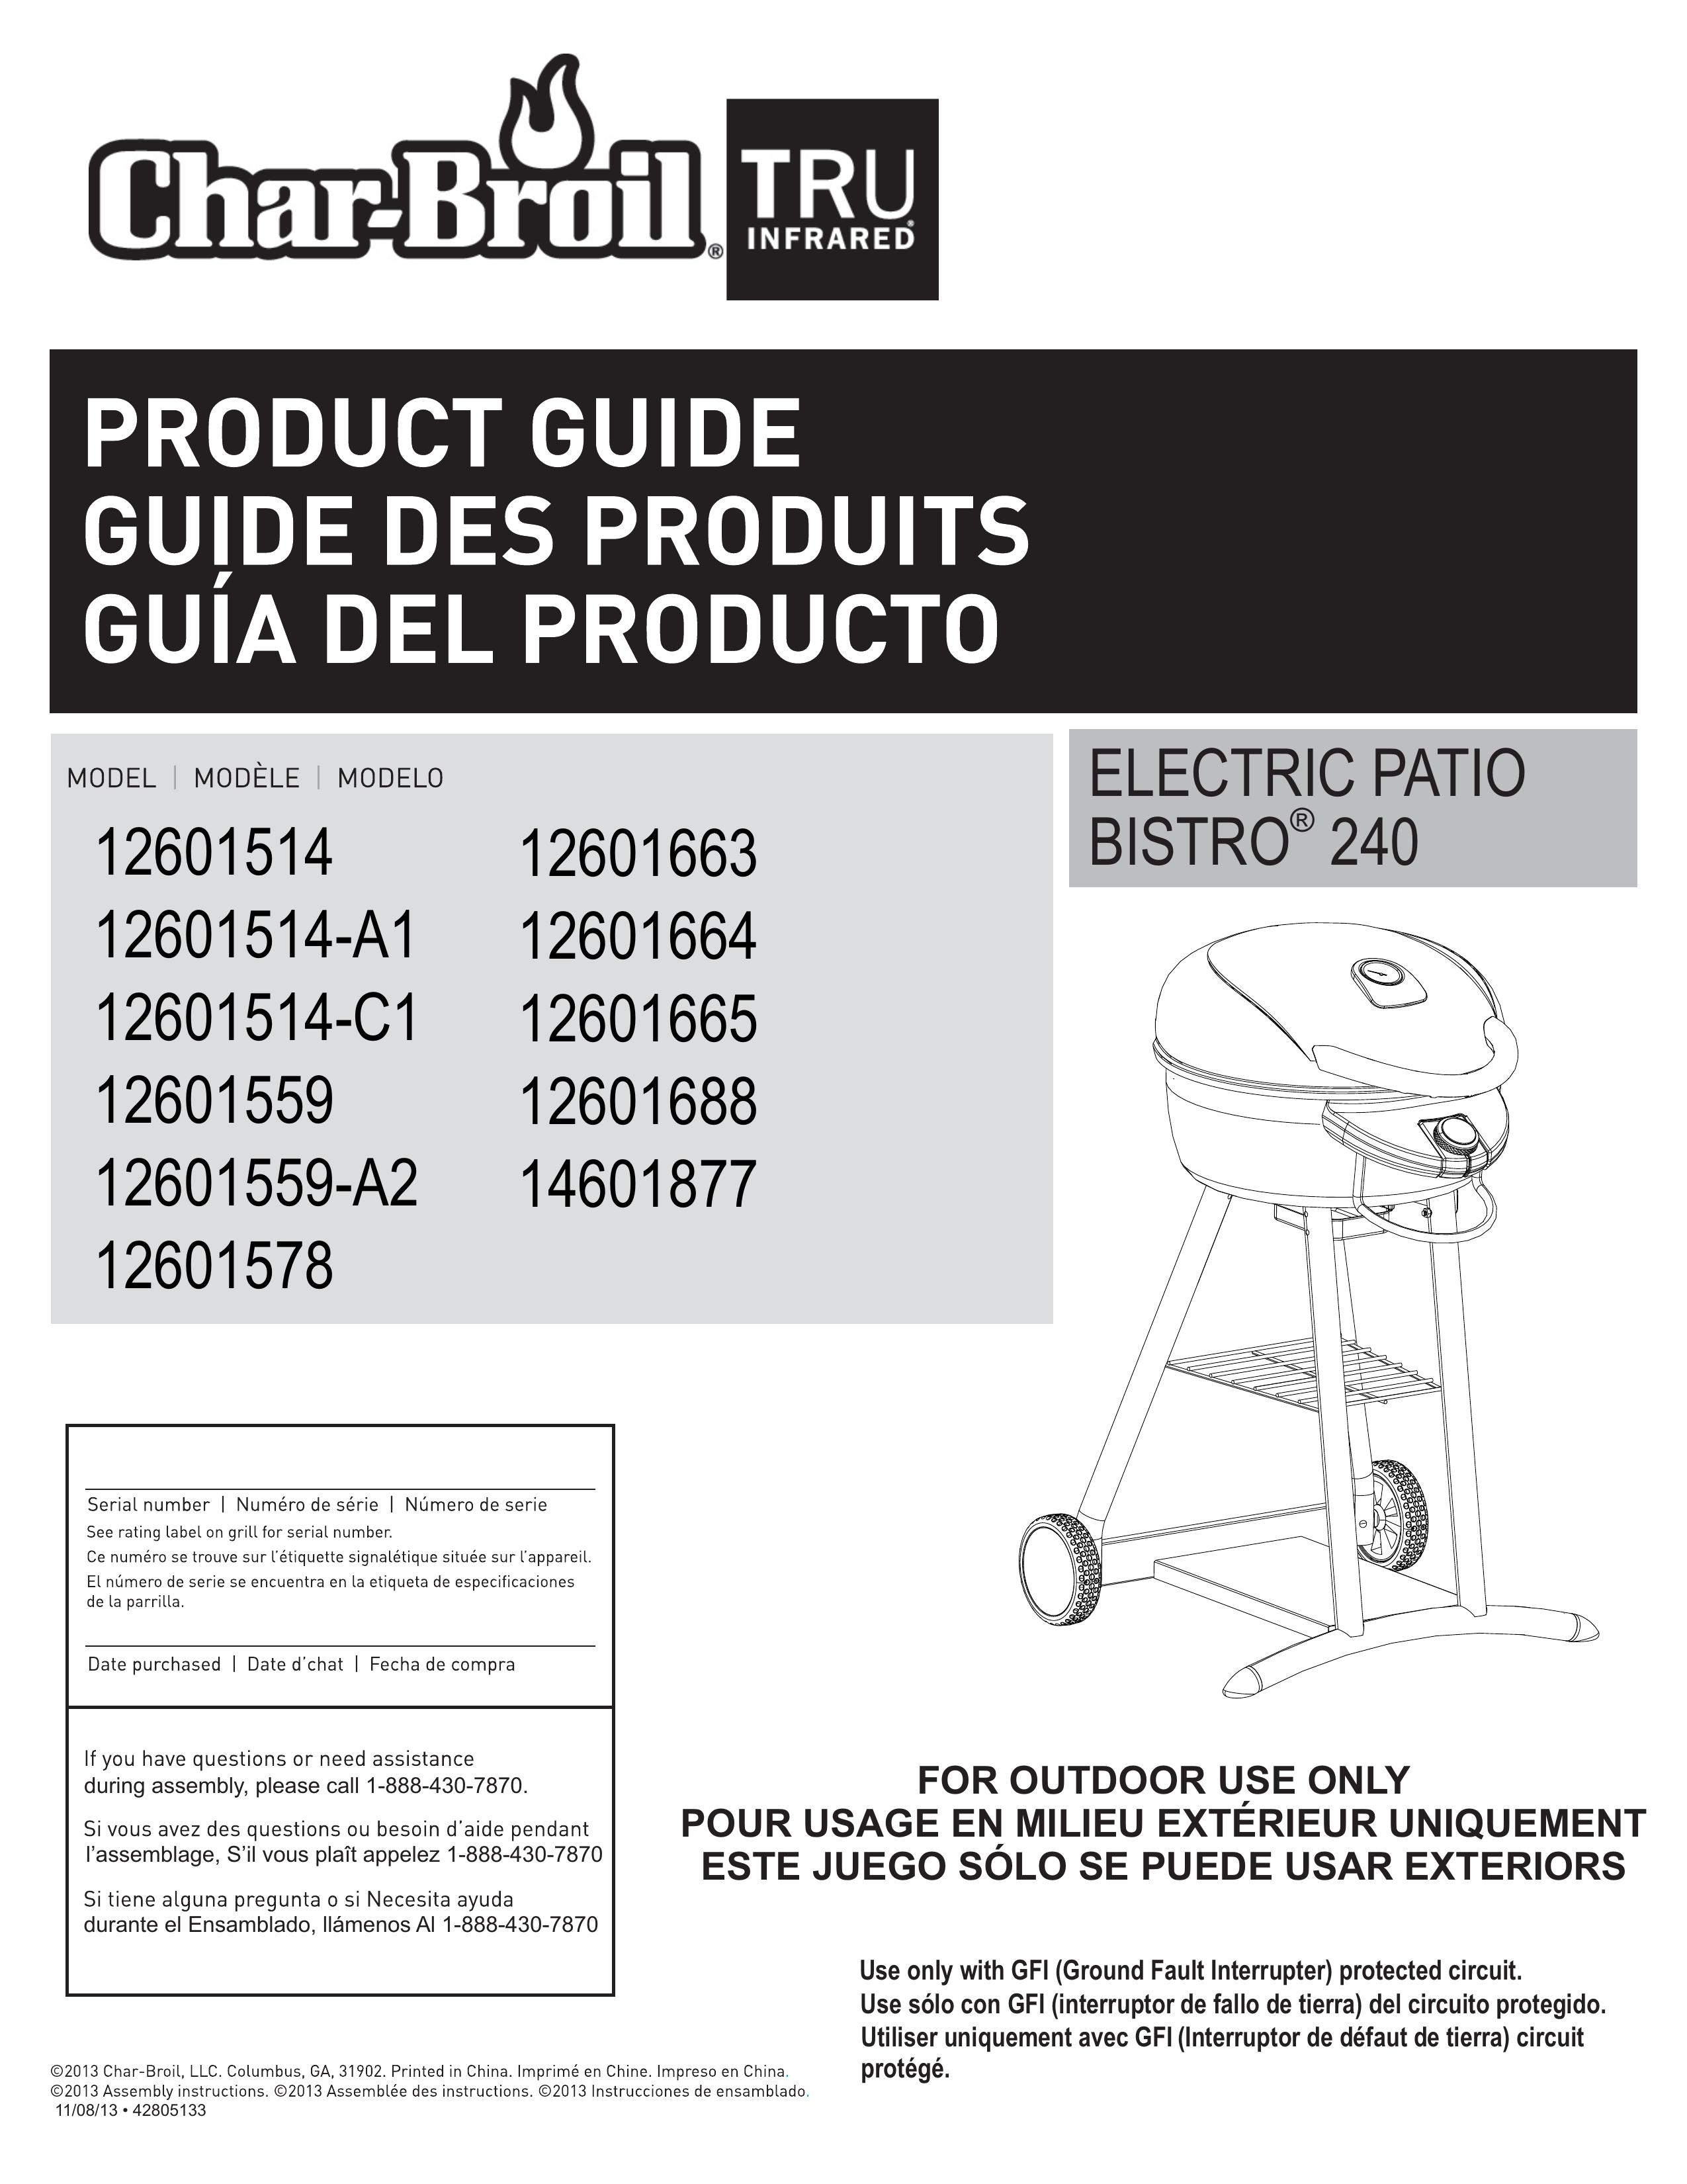 Char-Broil 12601514-C1 Electric Grill User Manual